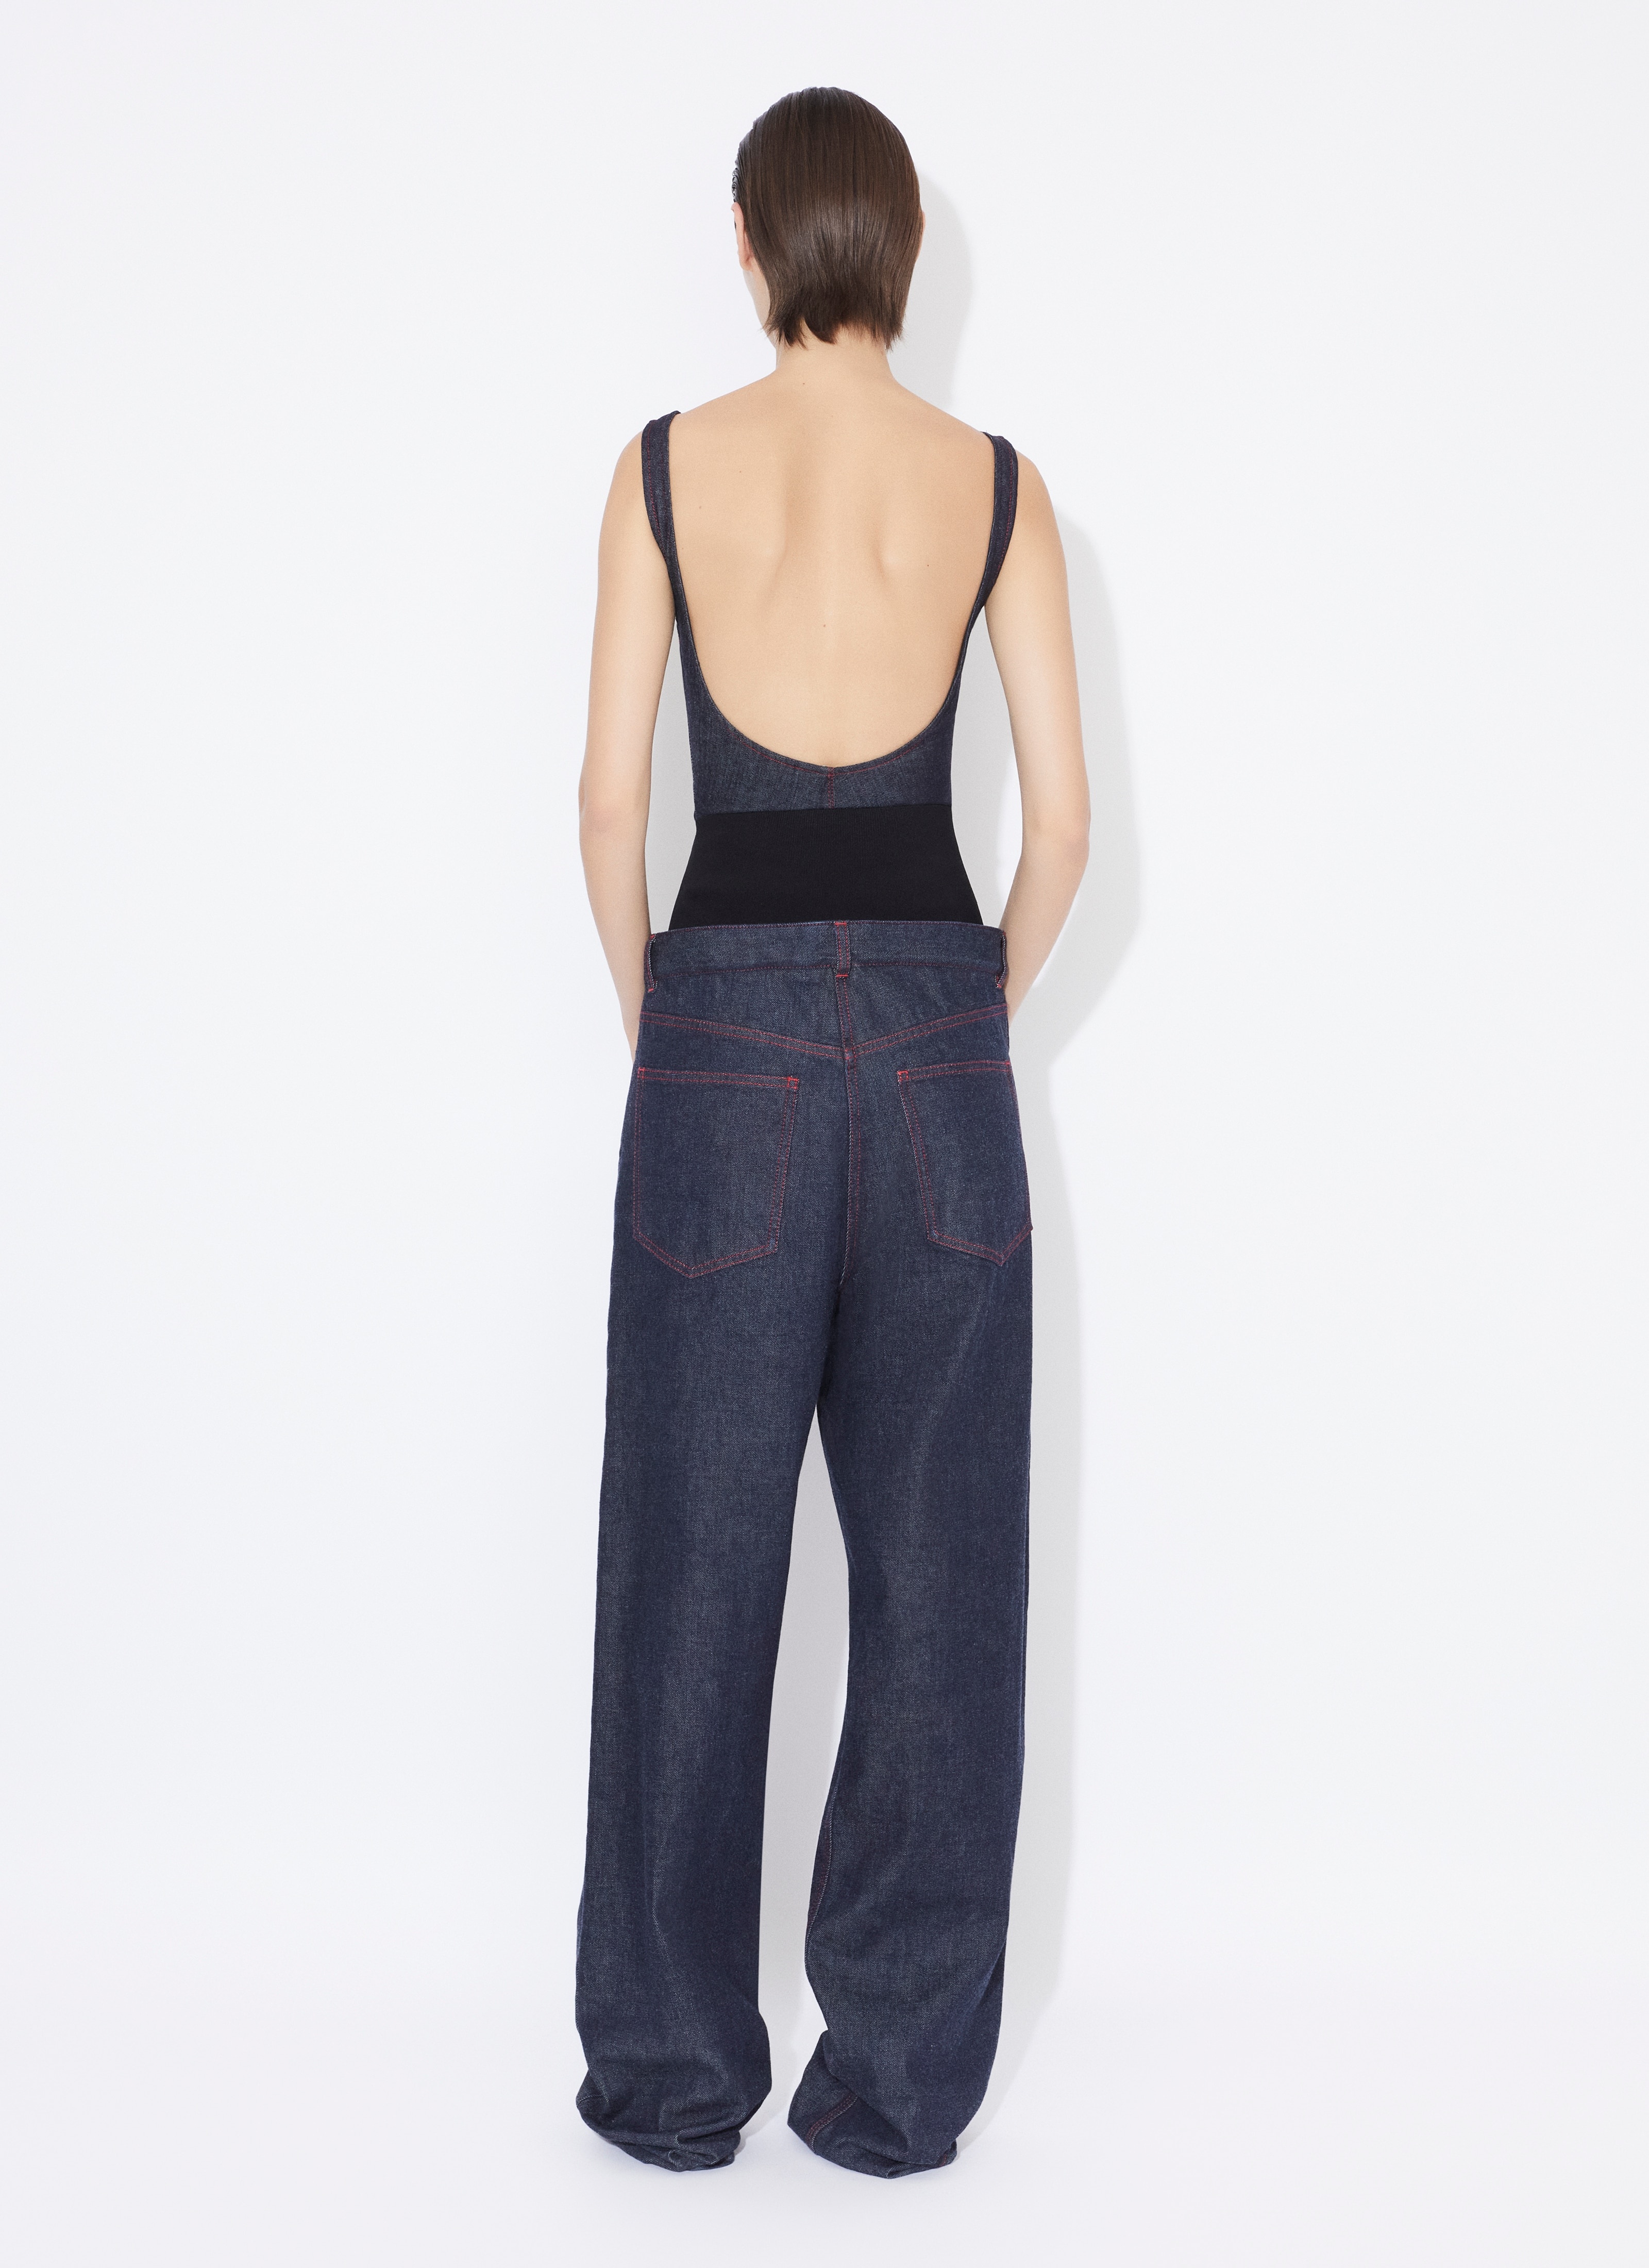 KNIT BAND JEANS IN RAW DENIM - 3